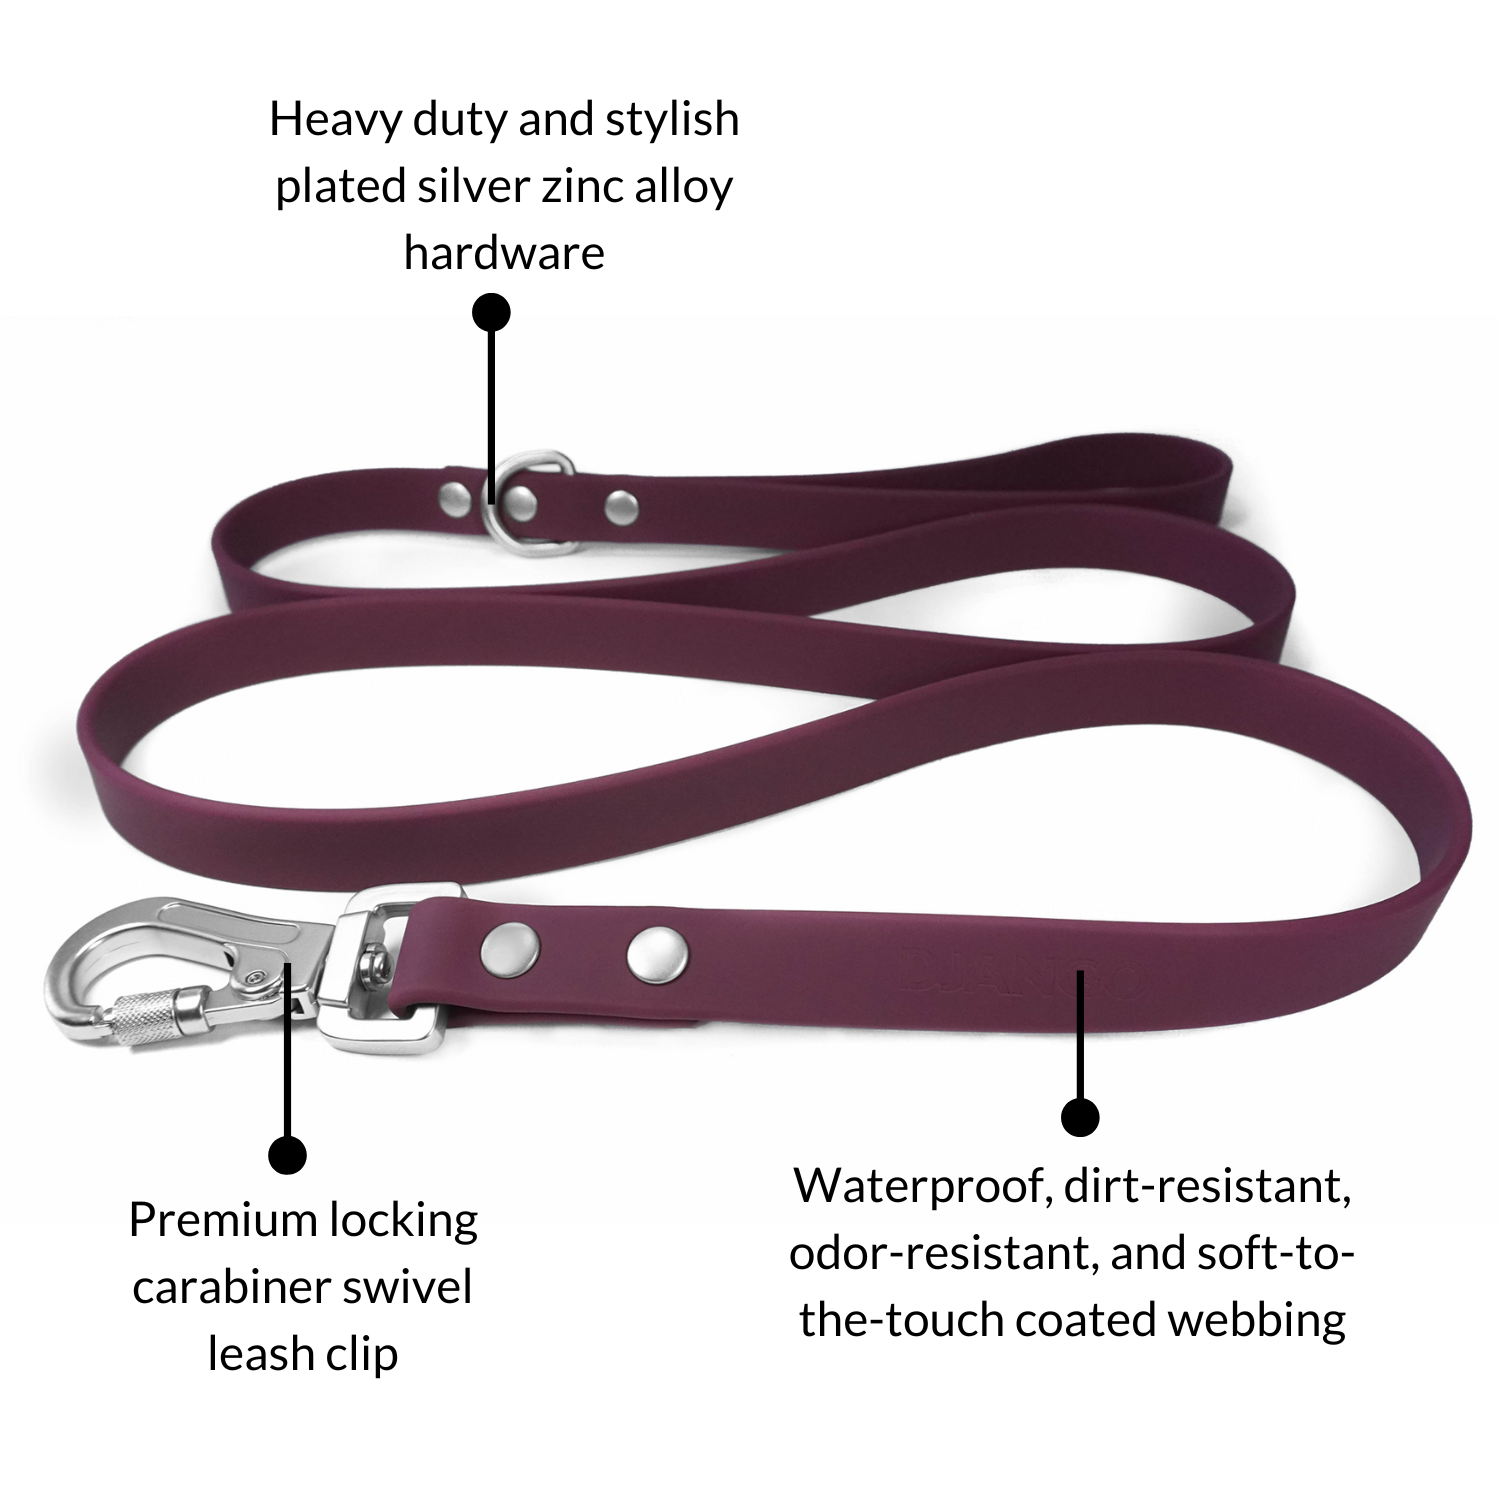 DJANGO Tahoe Dog Leash in Raspberry Purple - The waterproof dog leash features heavy duty and stylish plated silver hardware and a premium locking carabiner leash clip for extra security - djangobrand.com 